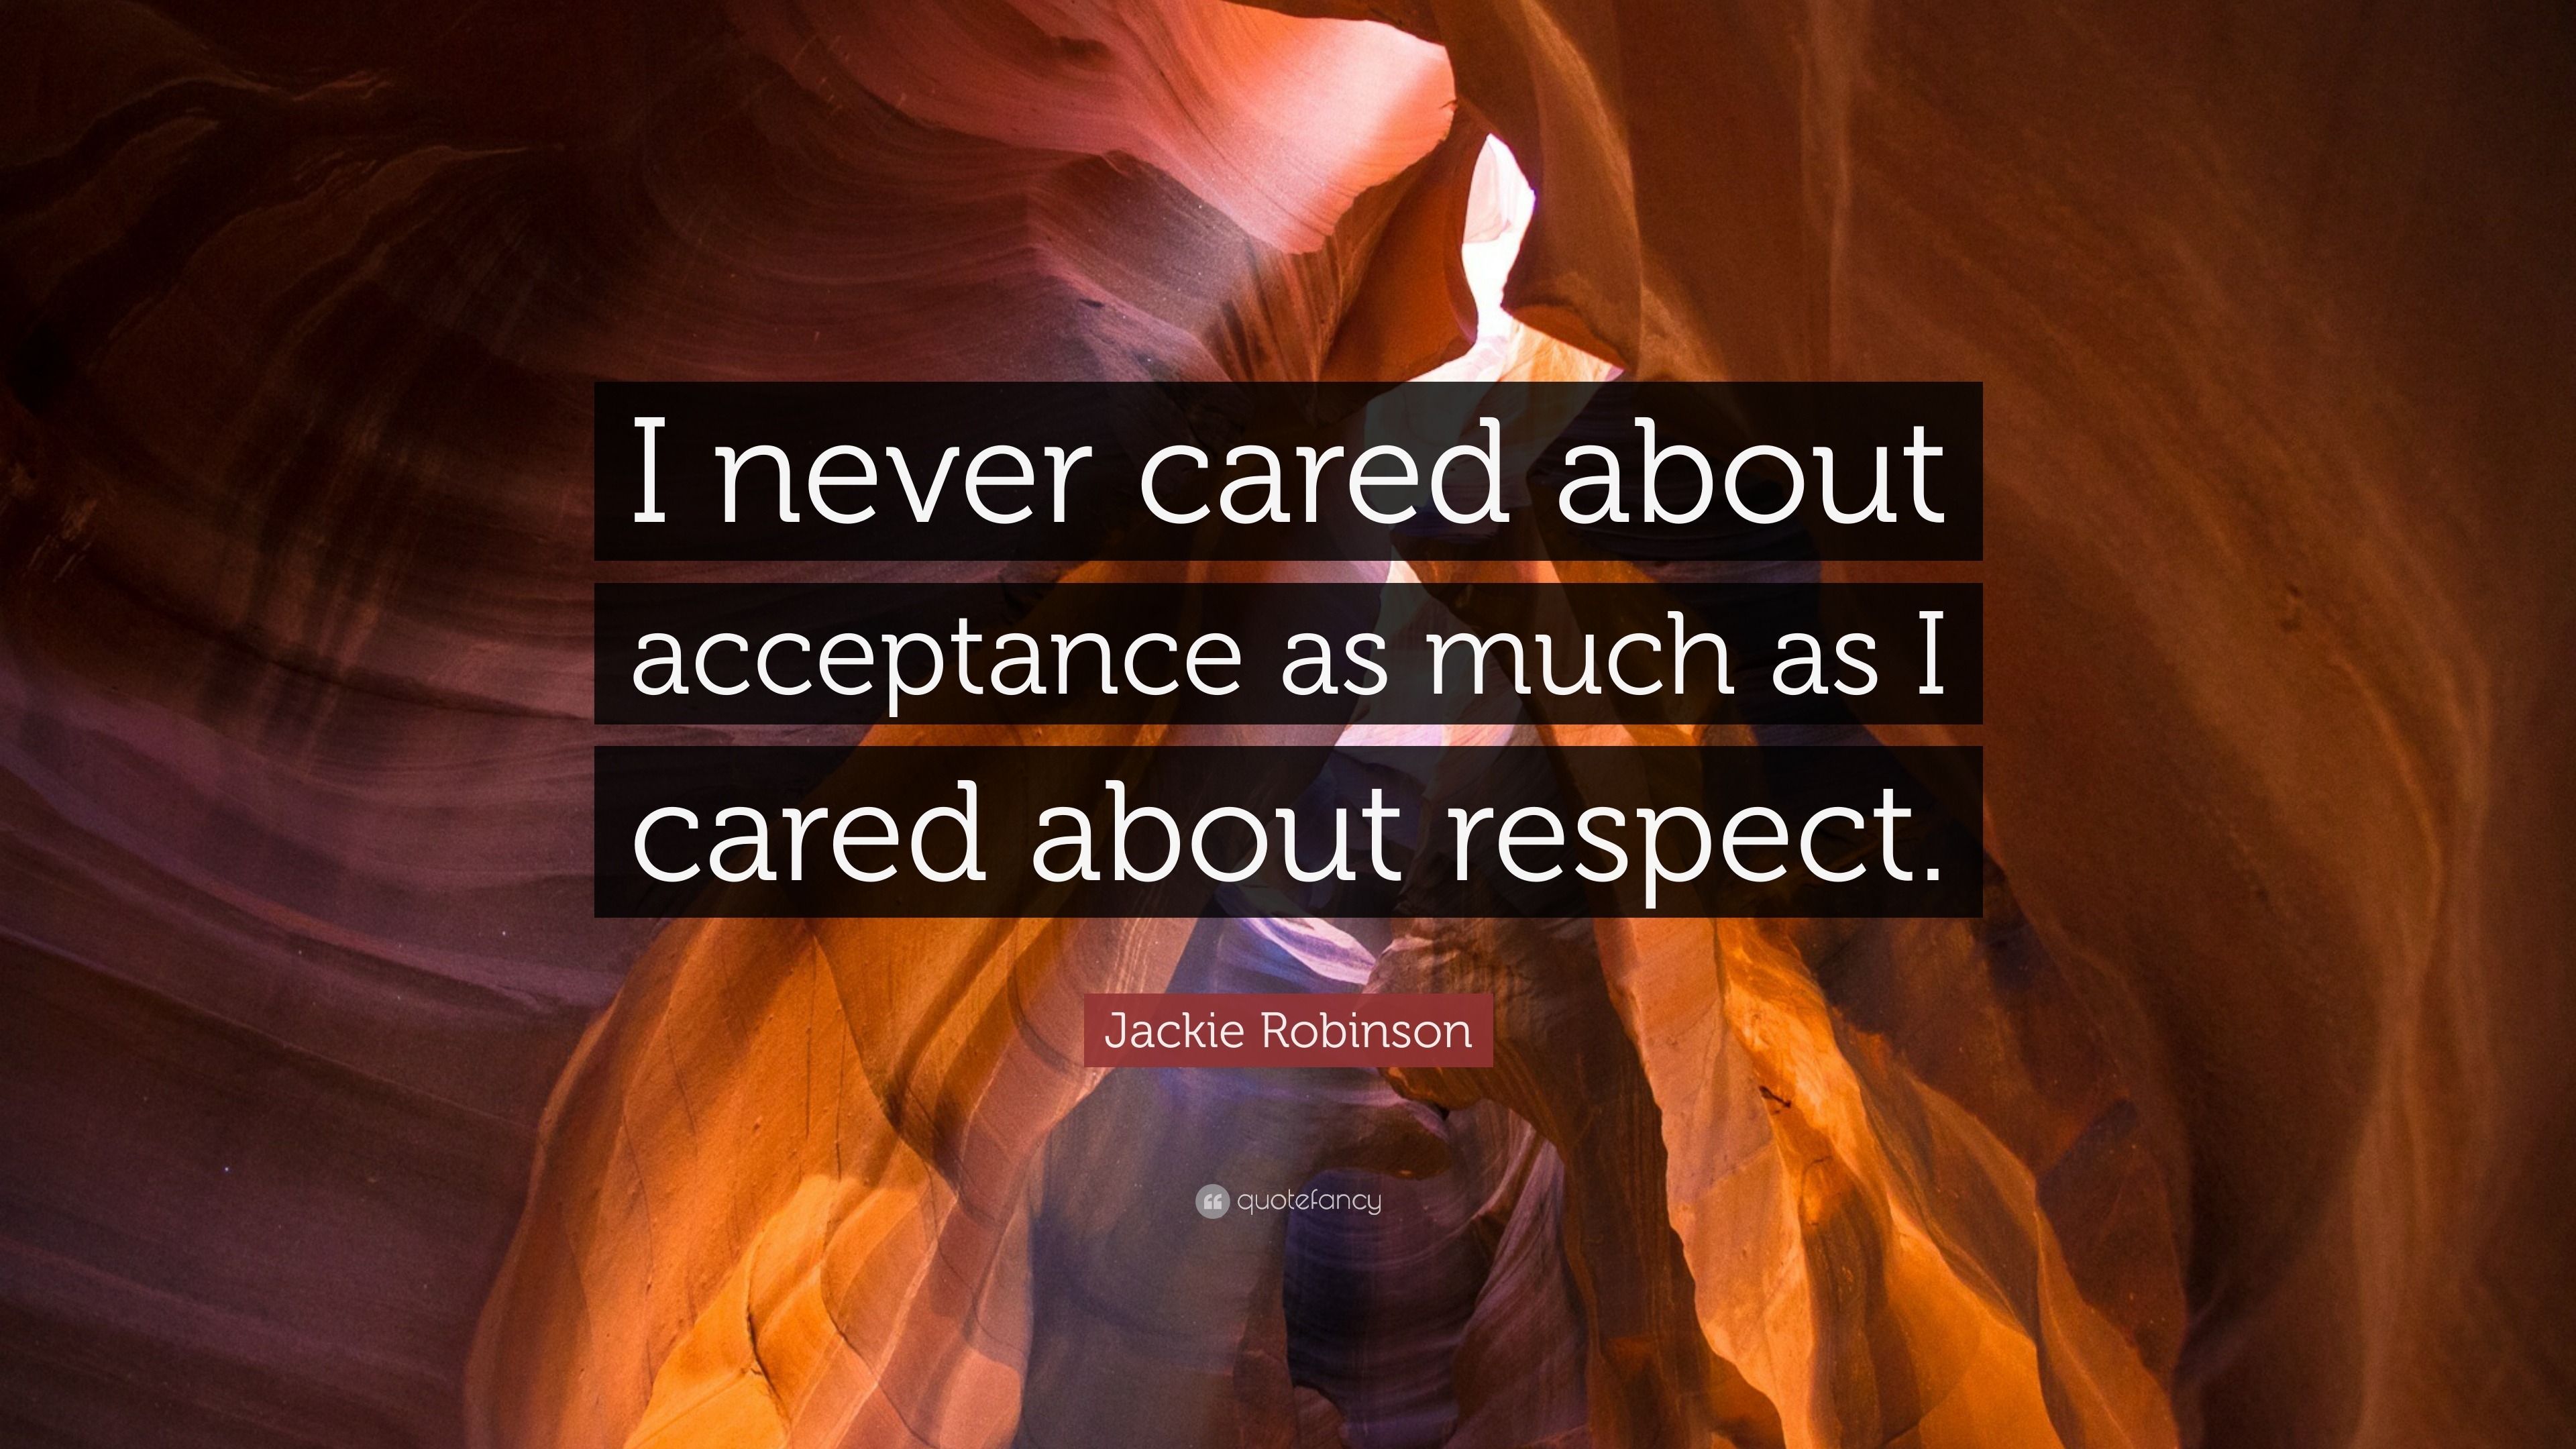 Jackie Robinson Quote “I never cared about acceptance as